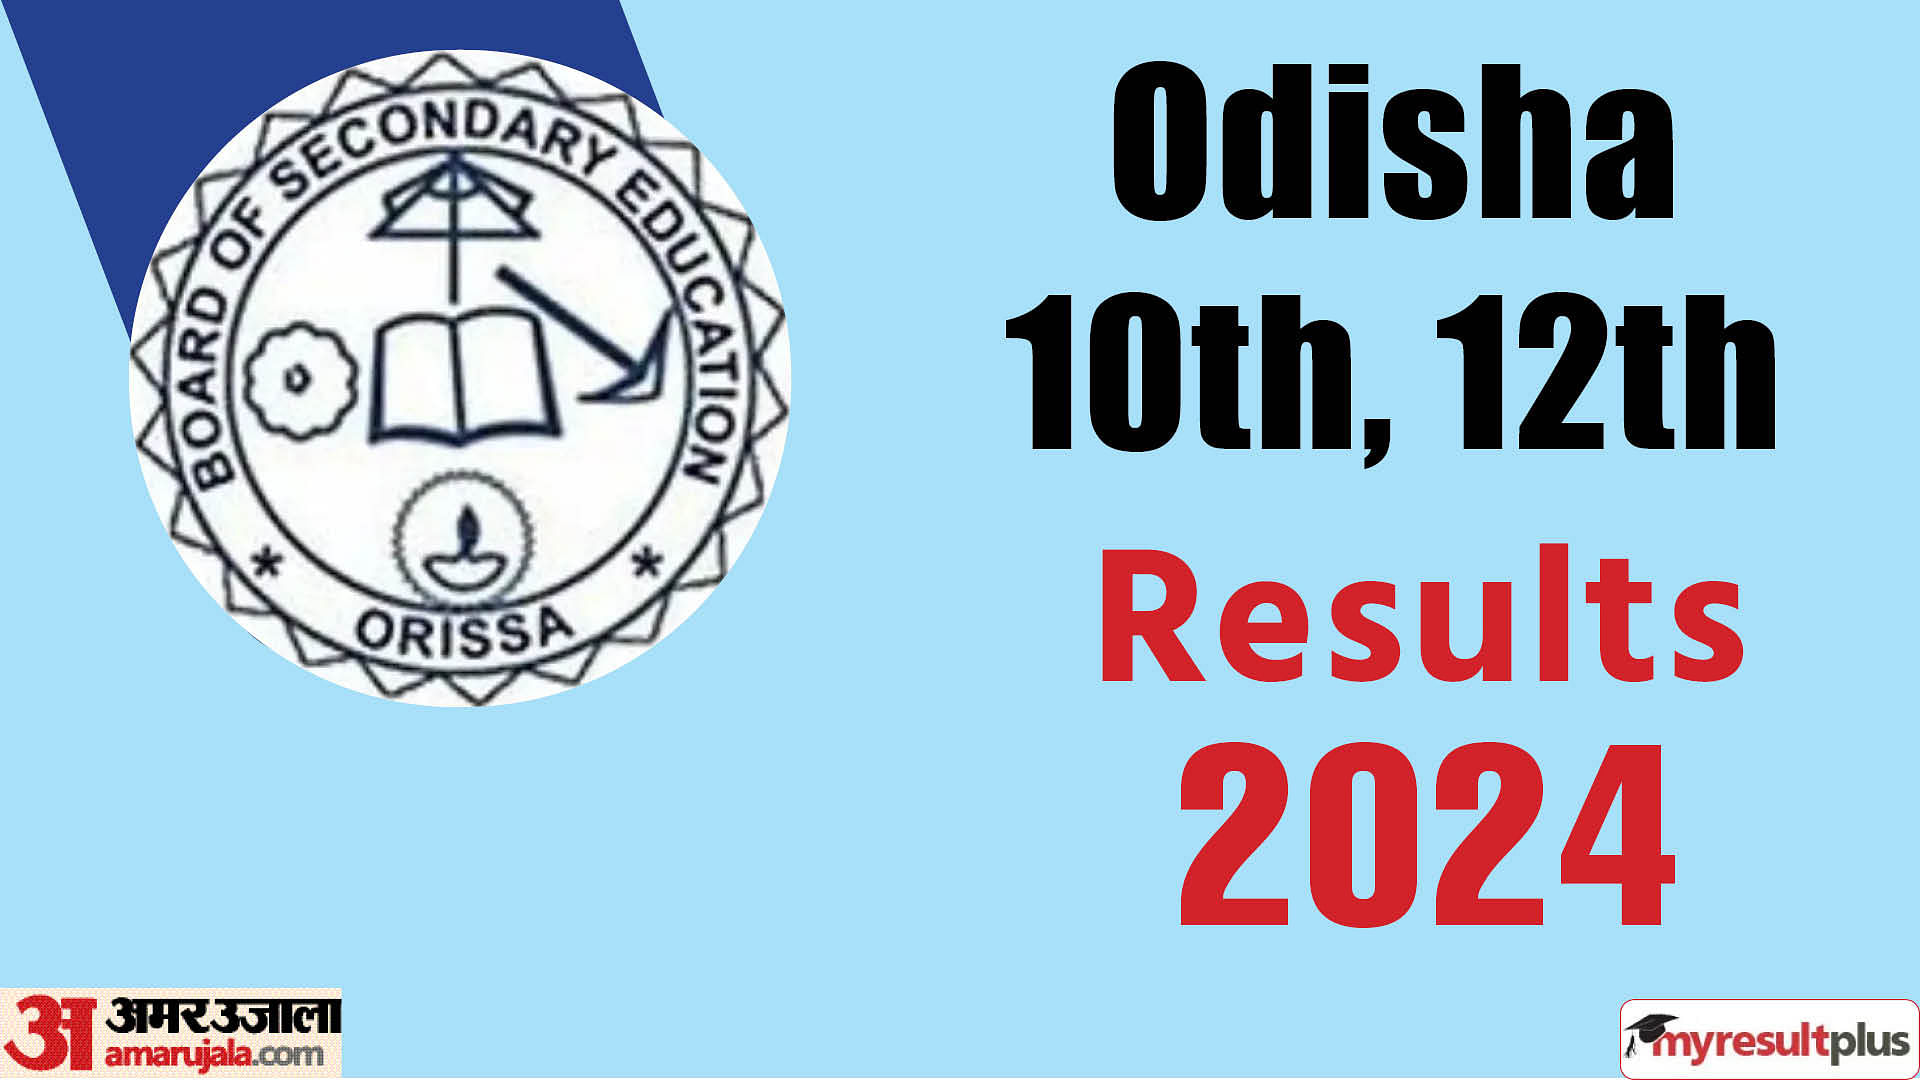 Odisha 10th, and 12th Results 2024 releasing tomorrow, Read about last year's result analytics here